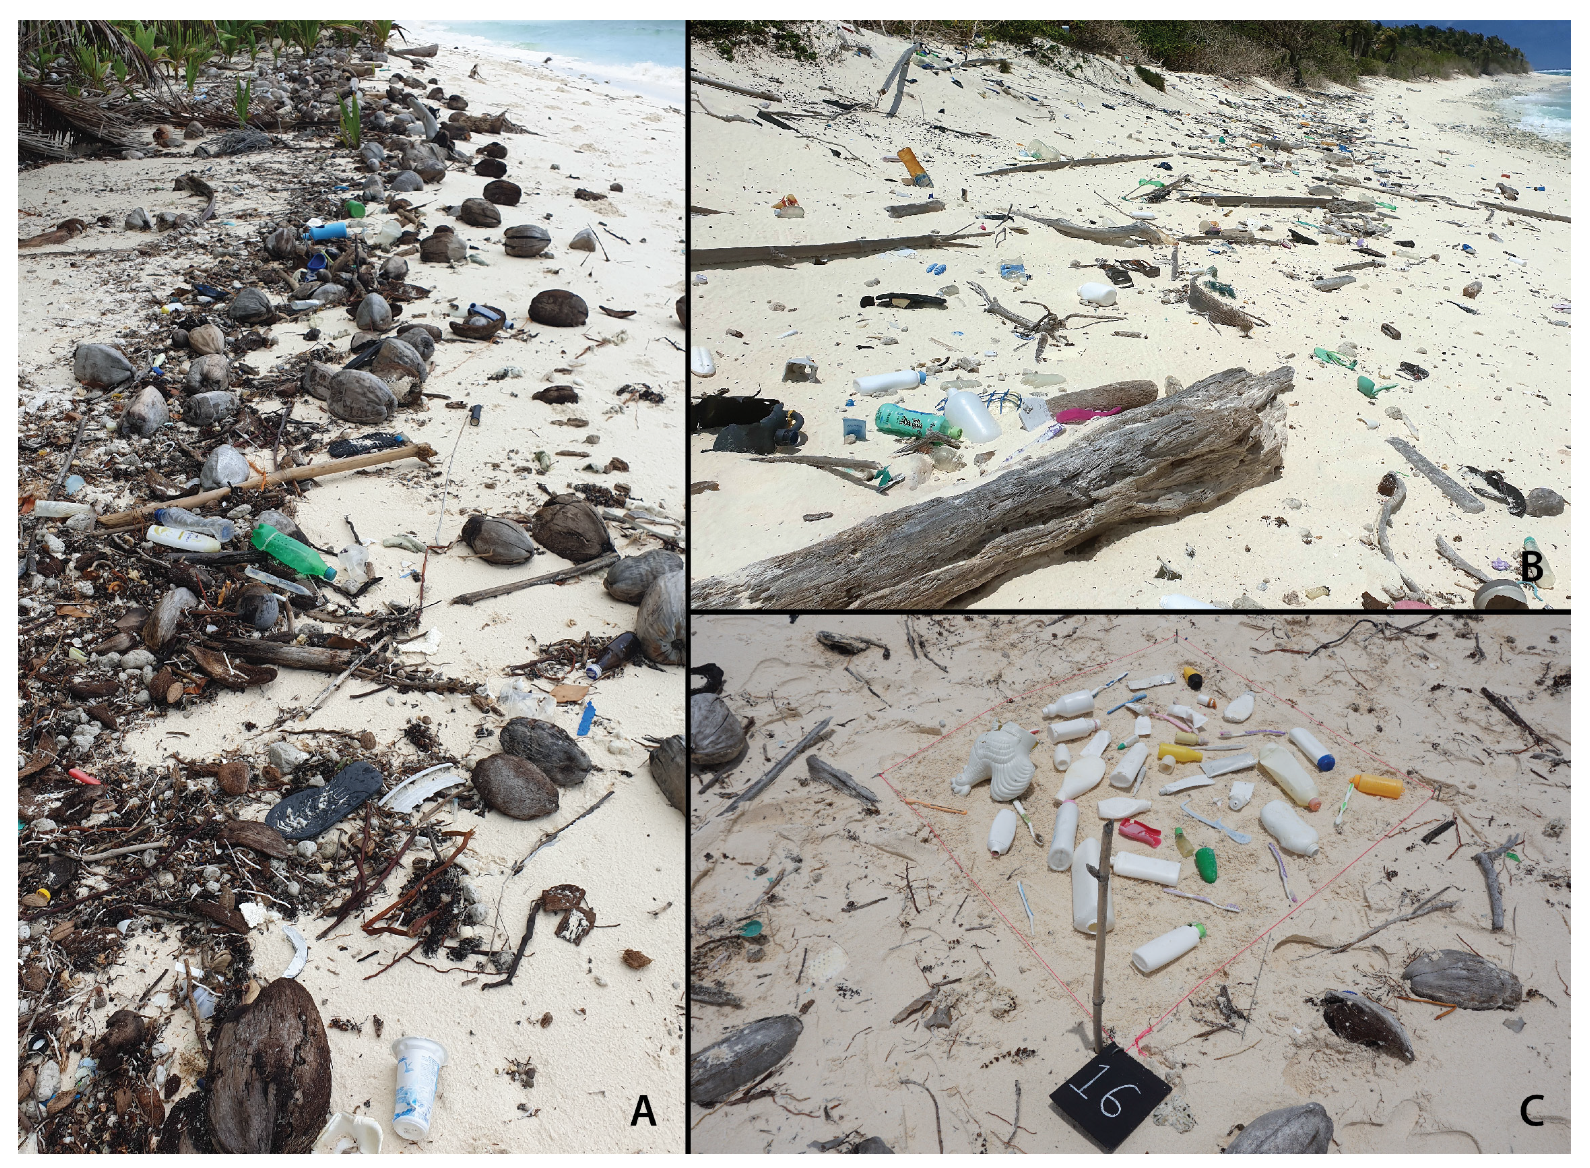 Remote Sensing | Free Full-Text | Quantifying Marine Plastic Debris in a Beach Environment Using Spectral Analysis HTML